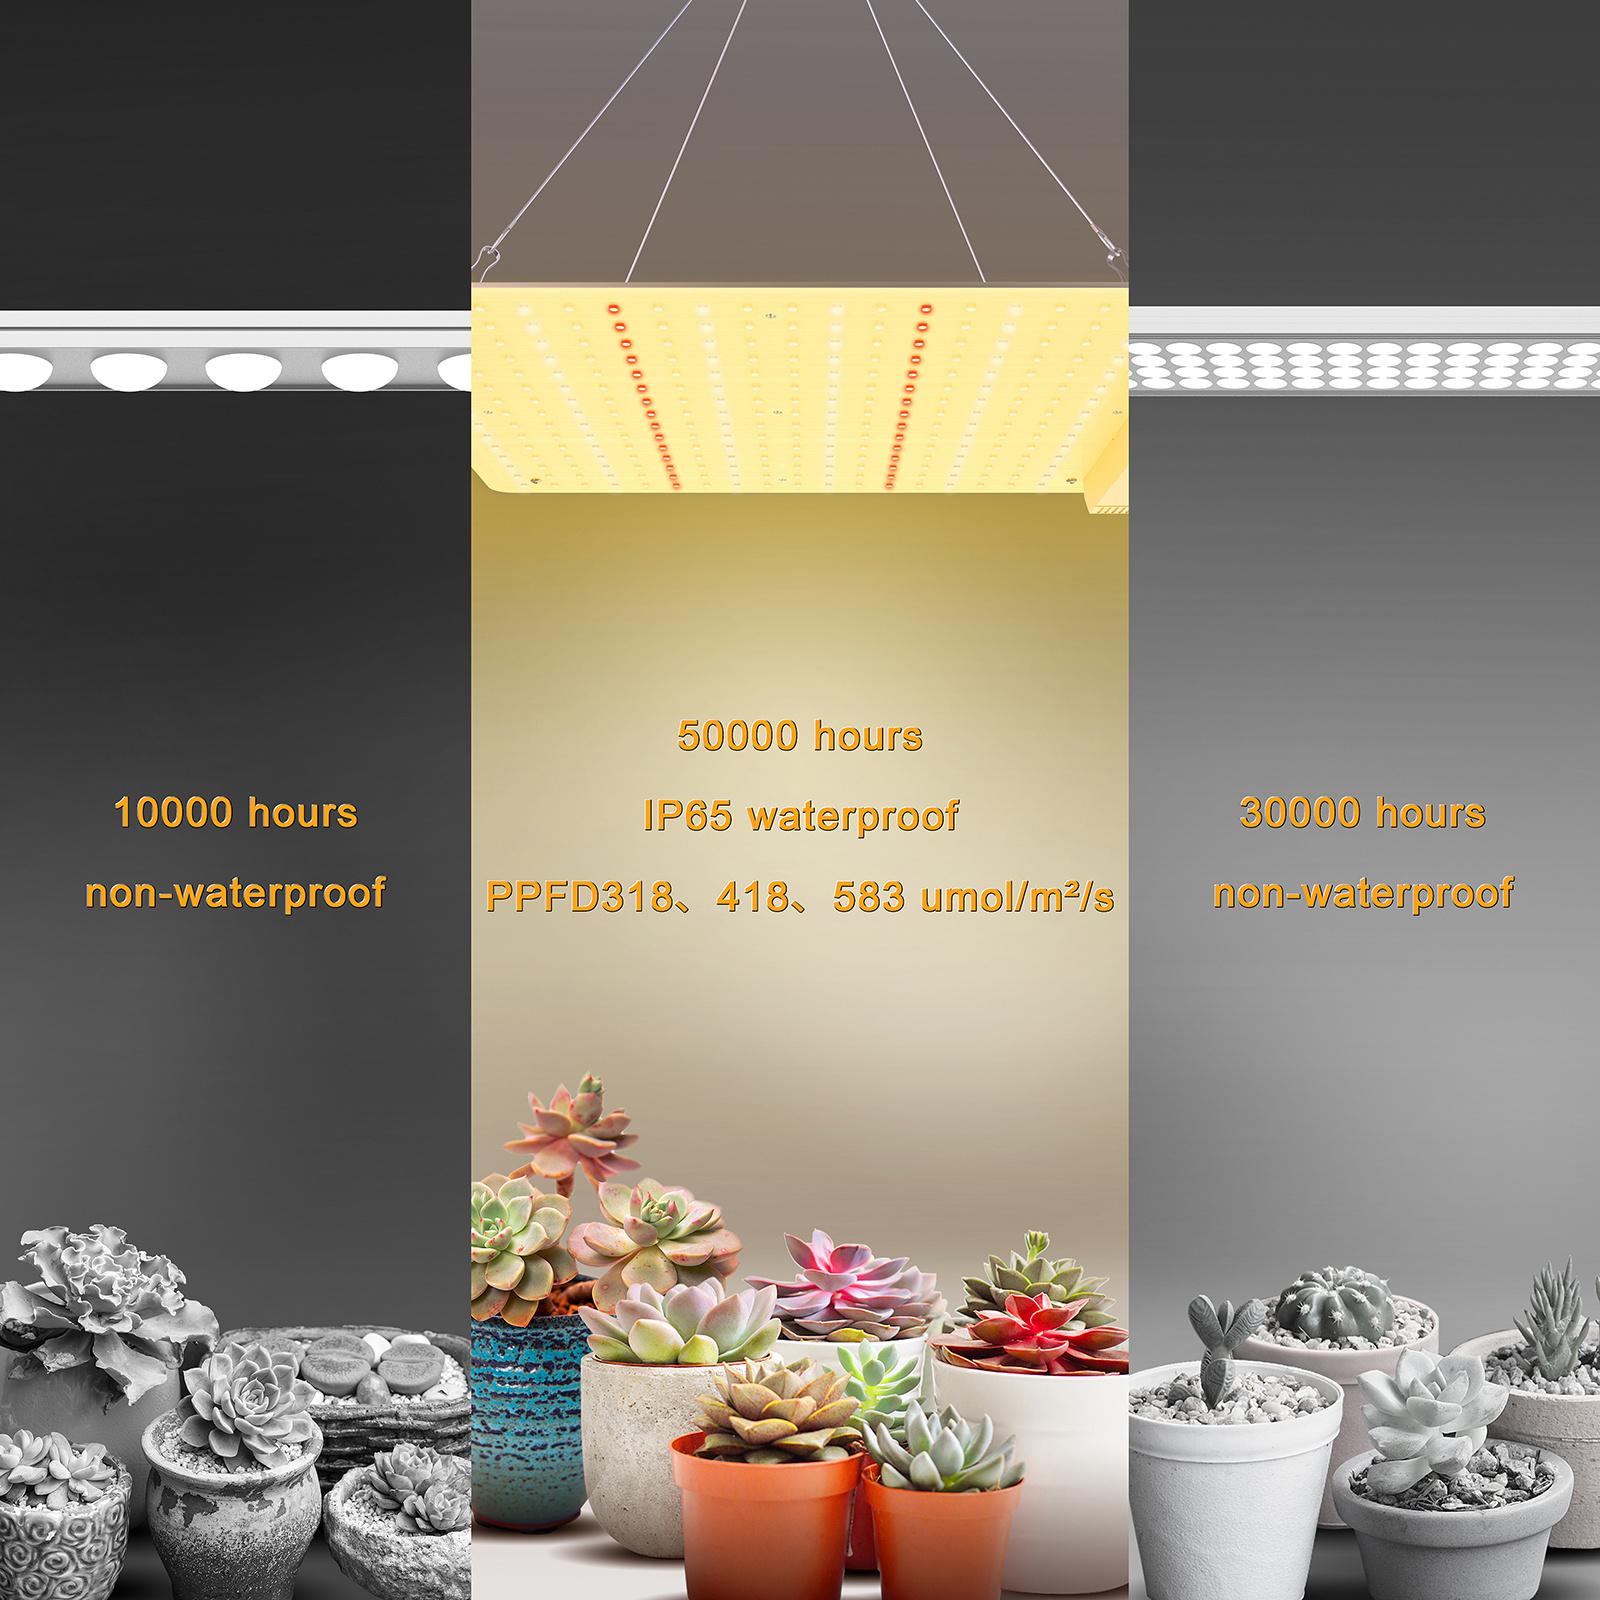 Cheeroll Grow Light 600W LED Grow Light, 2x2Ft Plant Grow Light 270PCS Lamp Bead, Featuring High PPFD High Output Grow Lights, Waterproof Rating up to IP65, for Indoor Plant Growing Vegetables Flowers